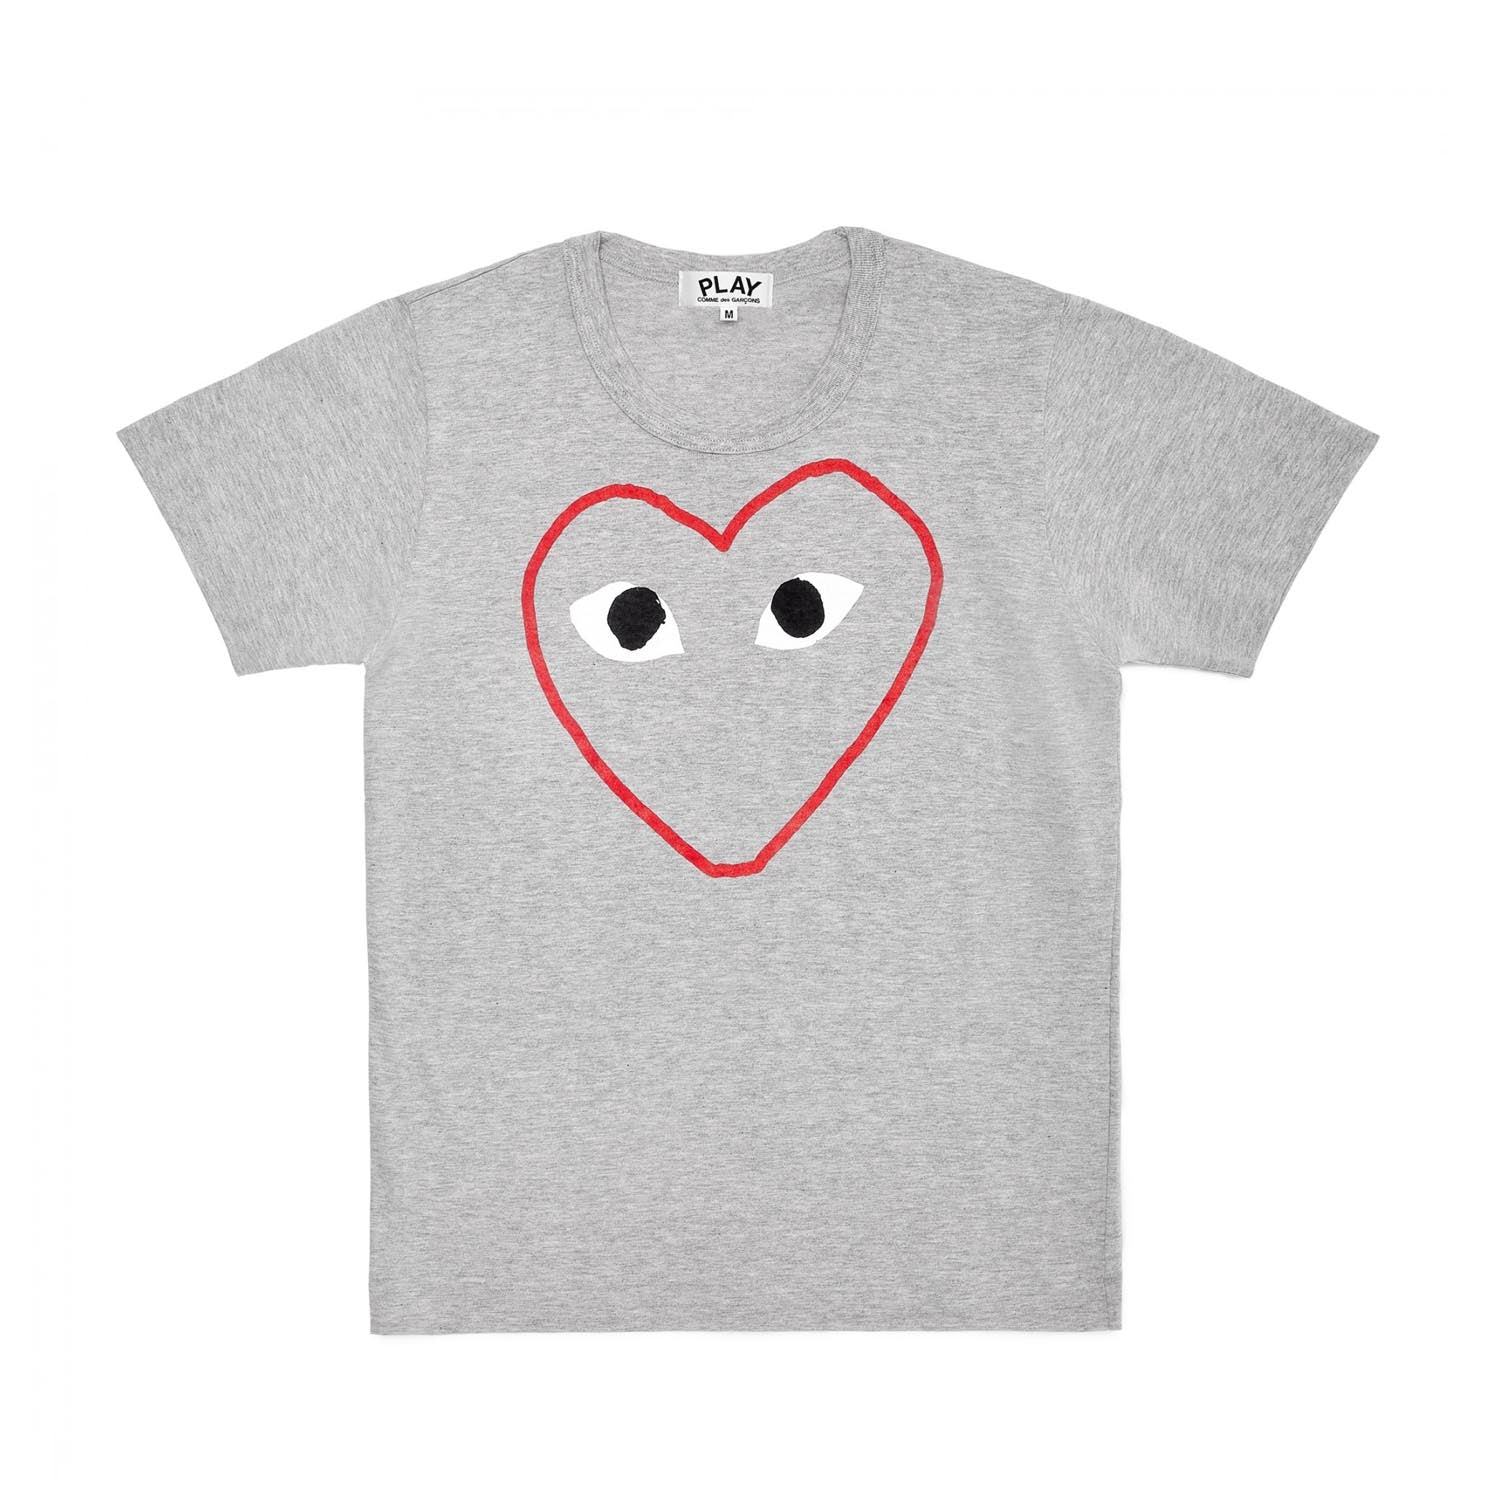 T-SHIRT WITH RED HEART OUTLINE - Comme des Garçons PLAY